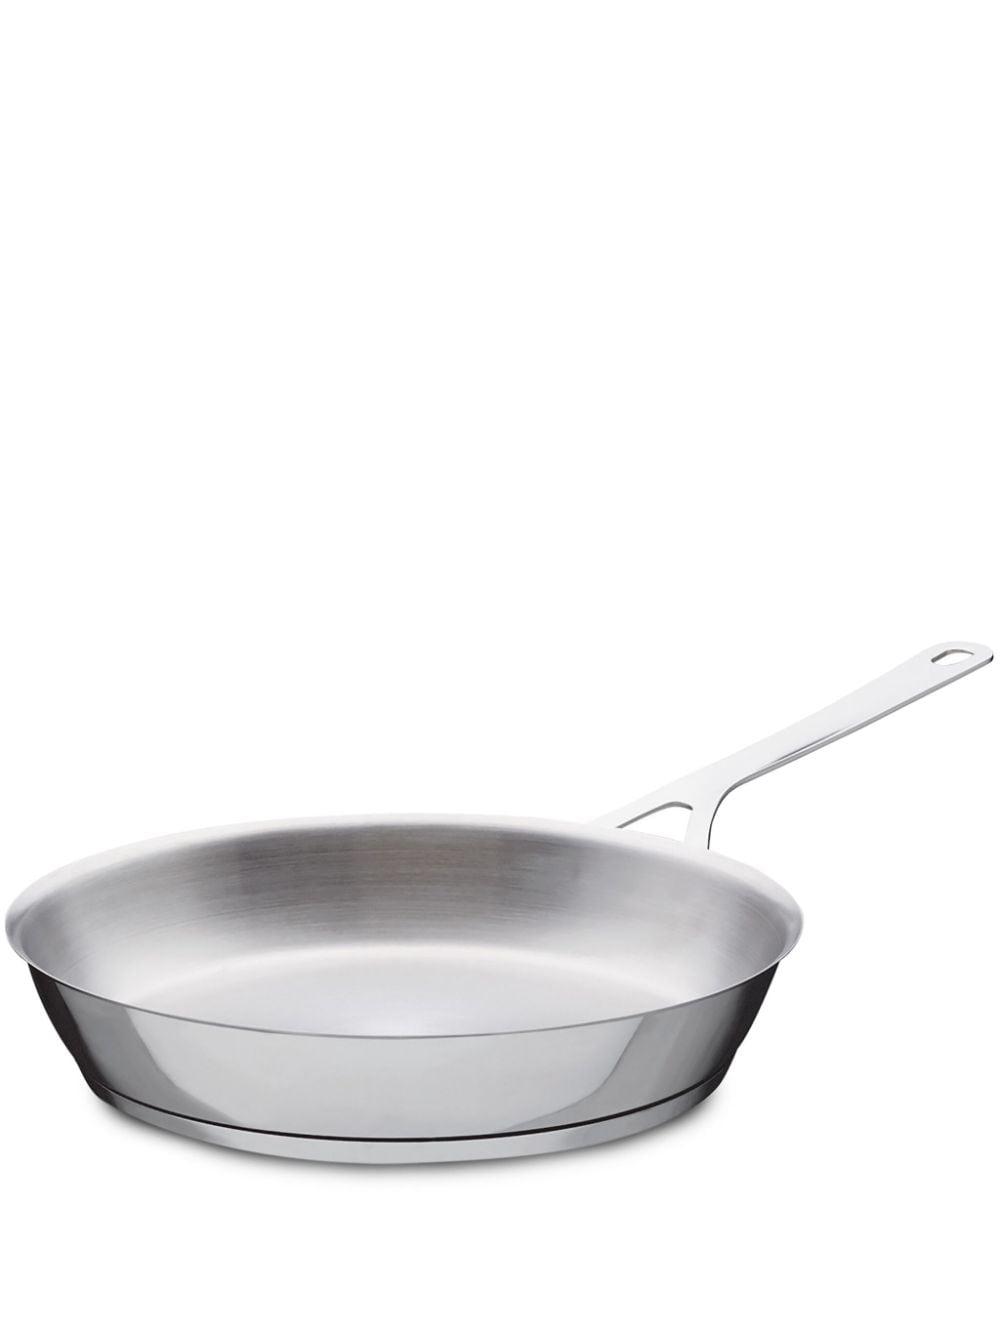 ALESSI POTS&PANS STAINLESS STEEL FRYING PAN